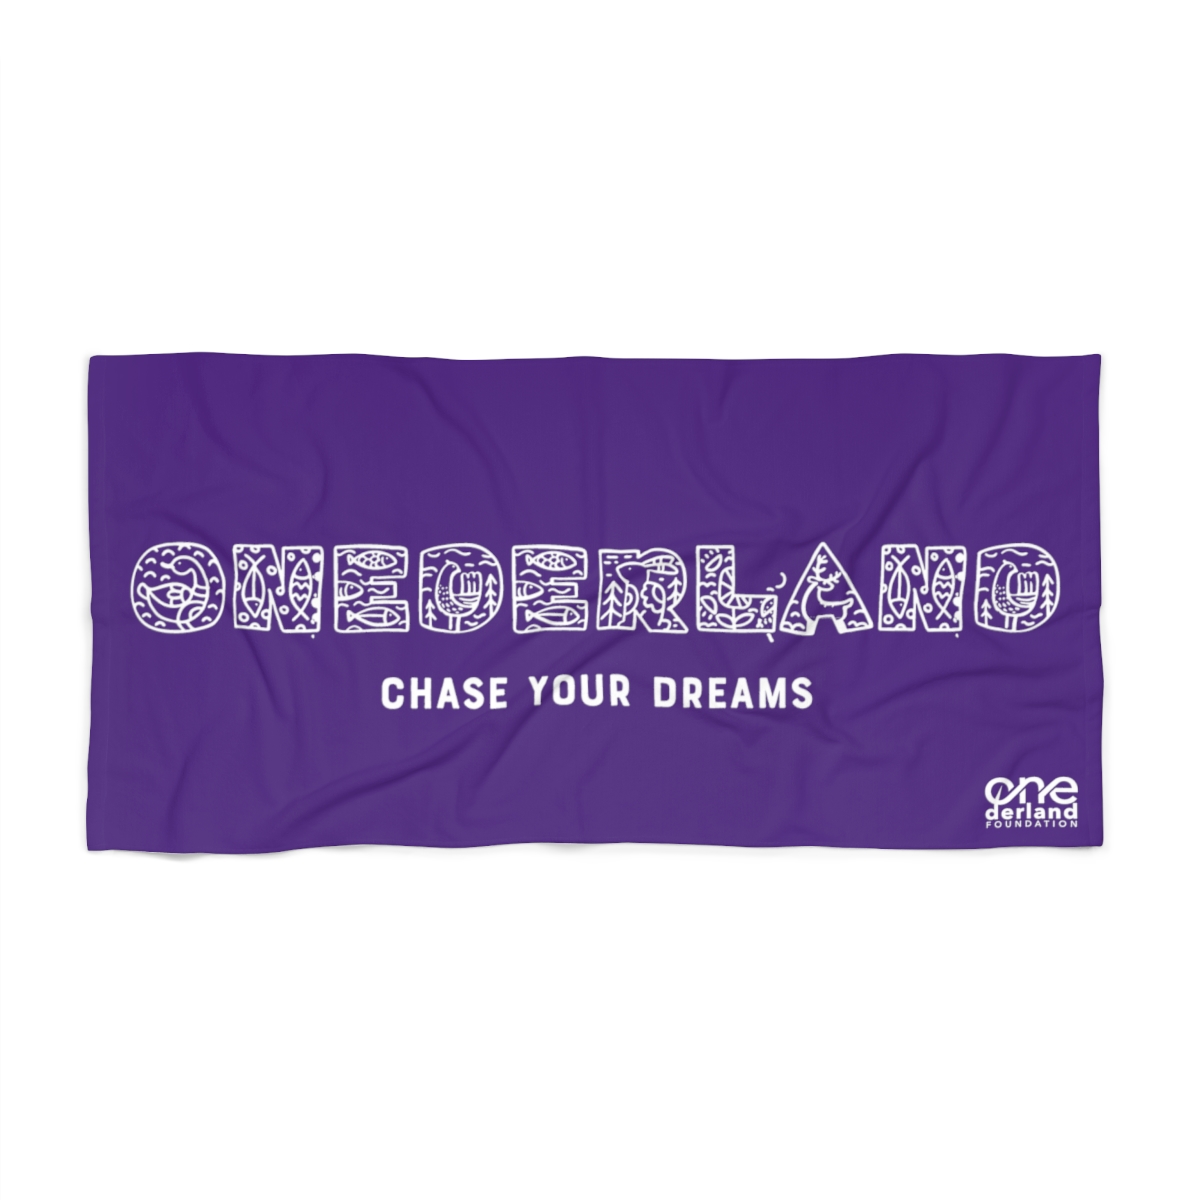 Copy of Beach Towel - Chase Your Dreams product main image